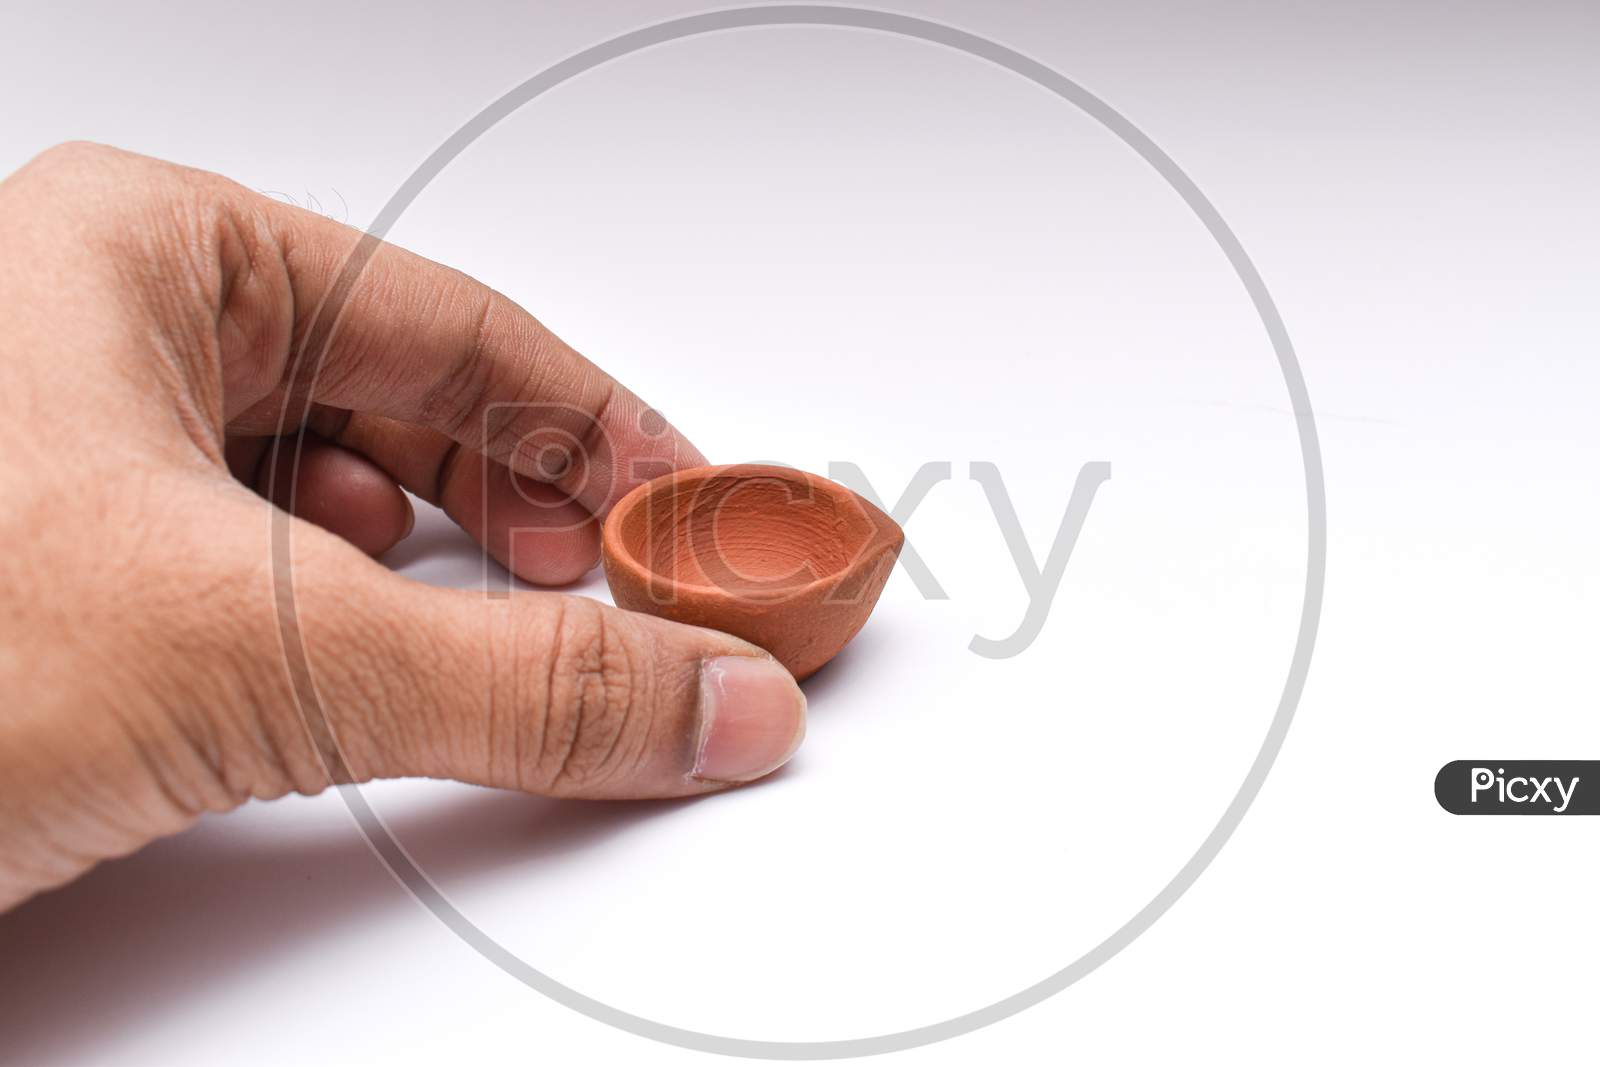 Placing Diya Or Clay Oil Lamp With Fingers For Diwali Festival Of Lights With White Background